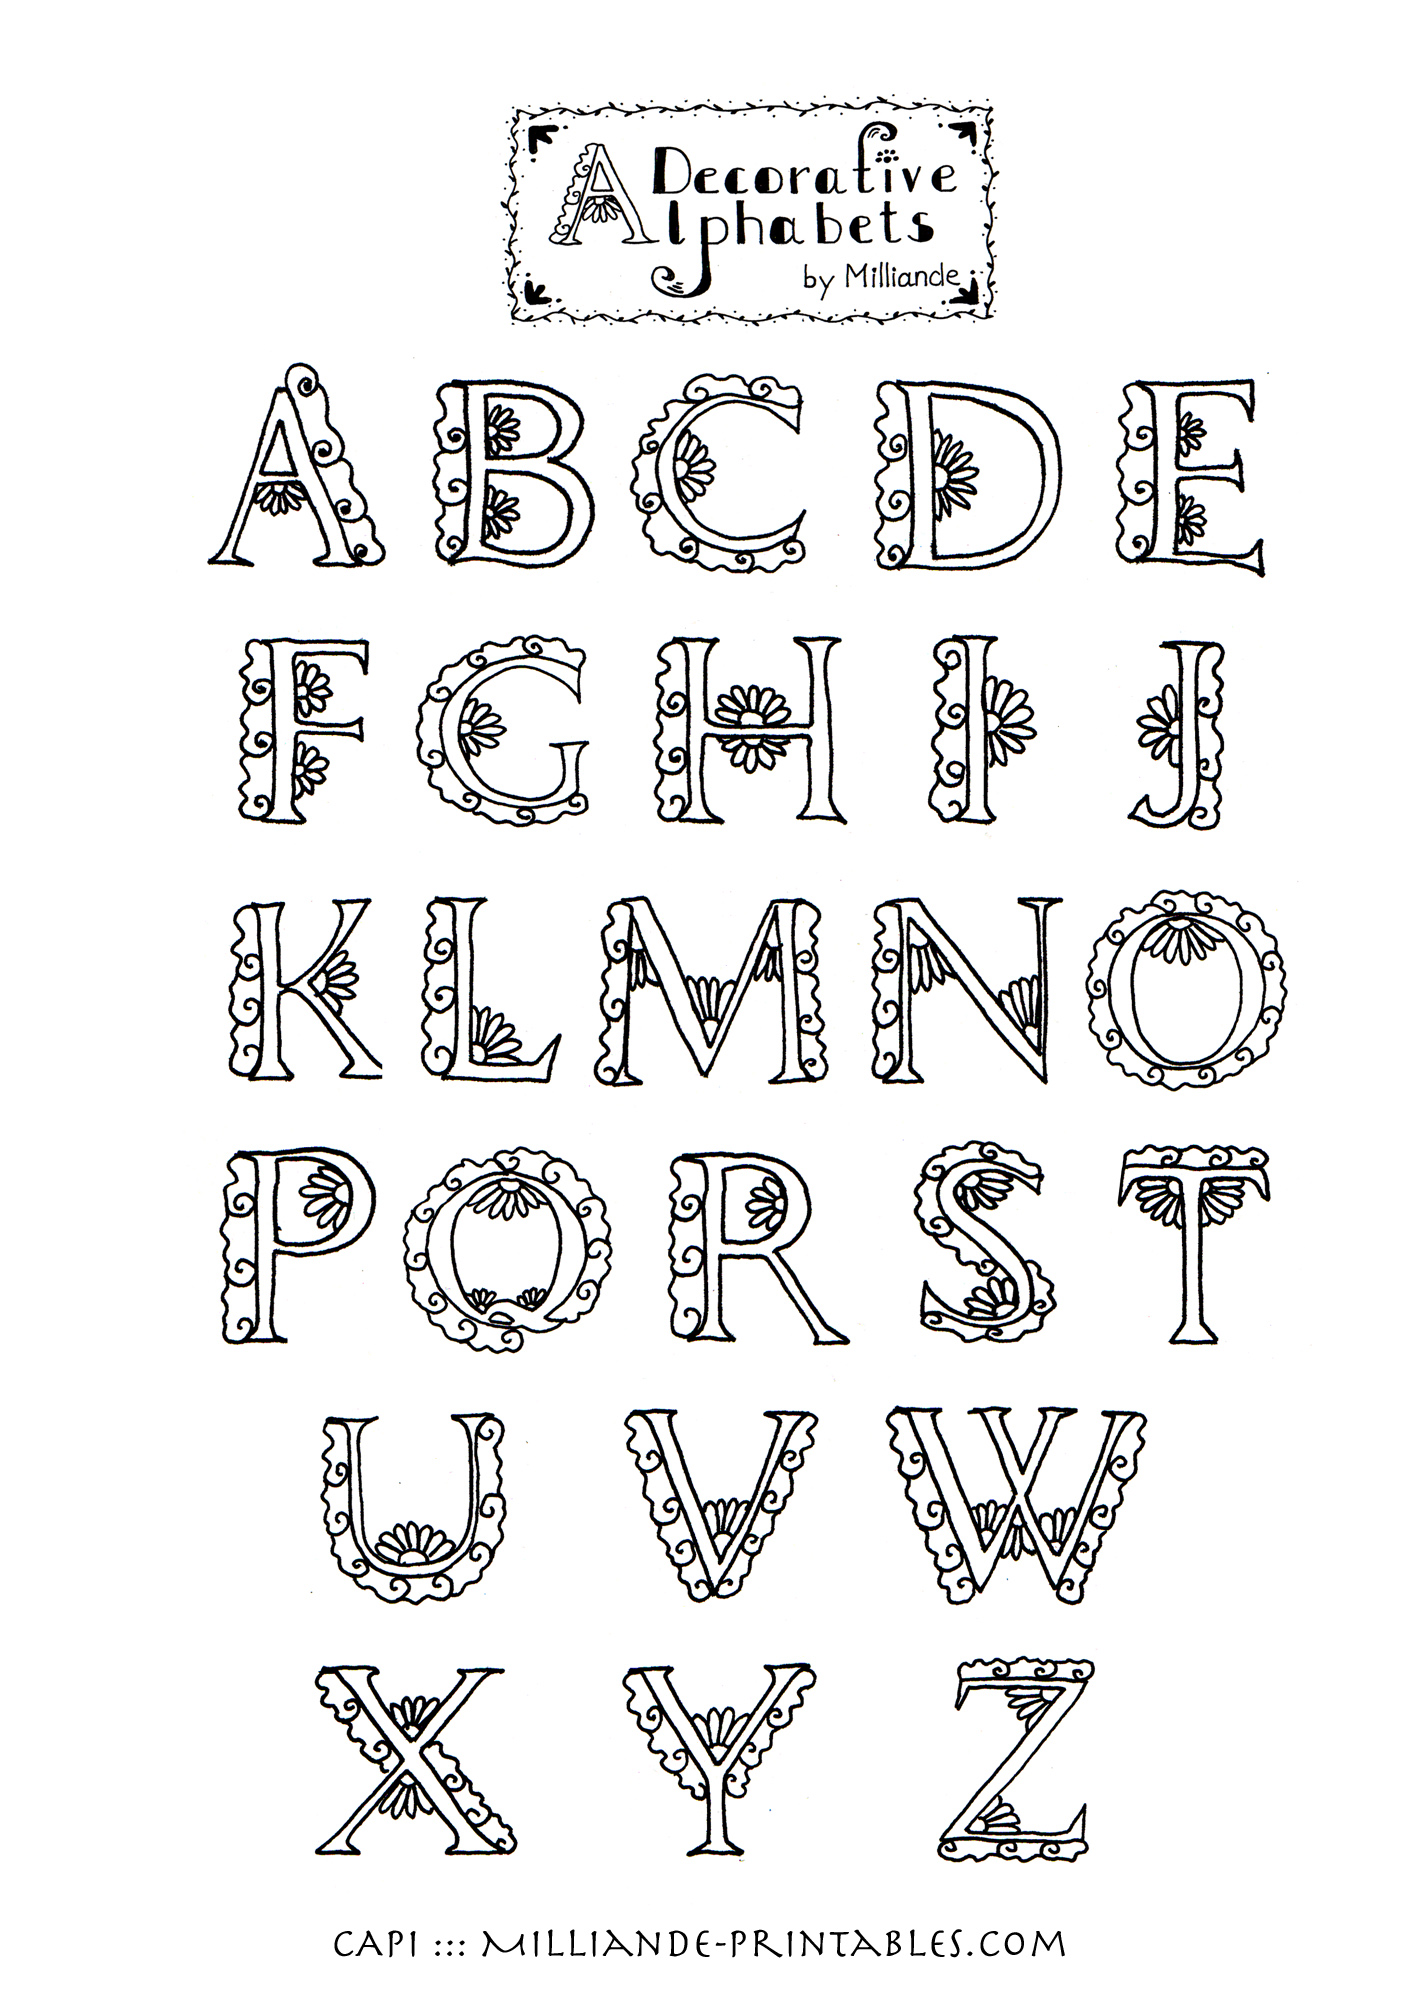 8 Best Images of Free Printable Lettering Styles - 3D Graffiti Alphabet ...